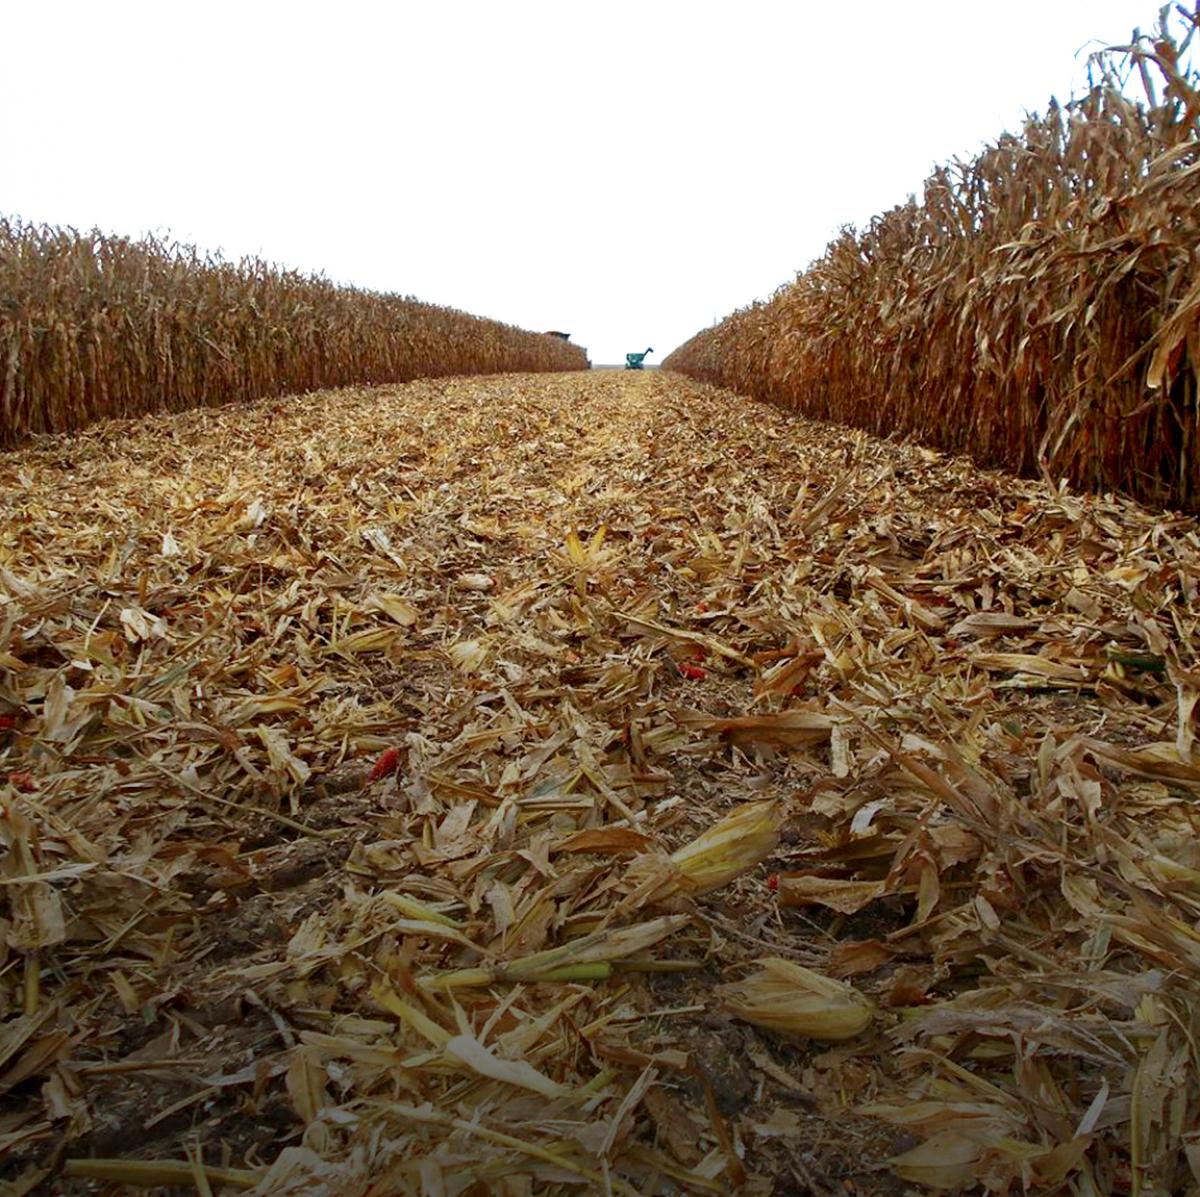 A Devastated harvested corn pass.